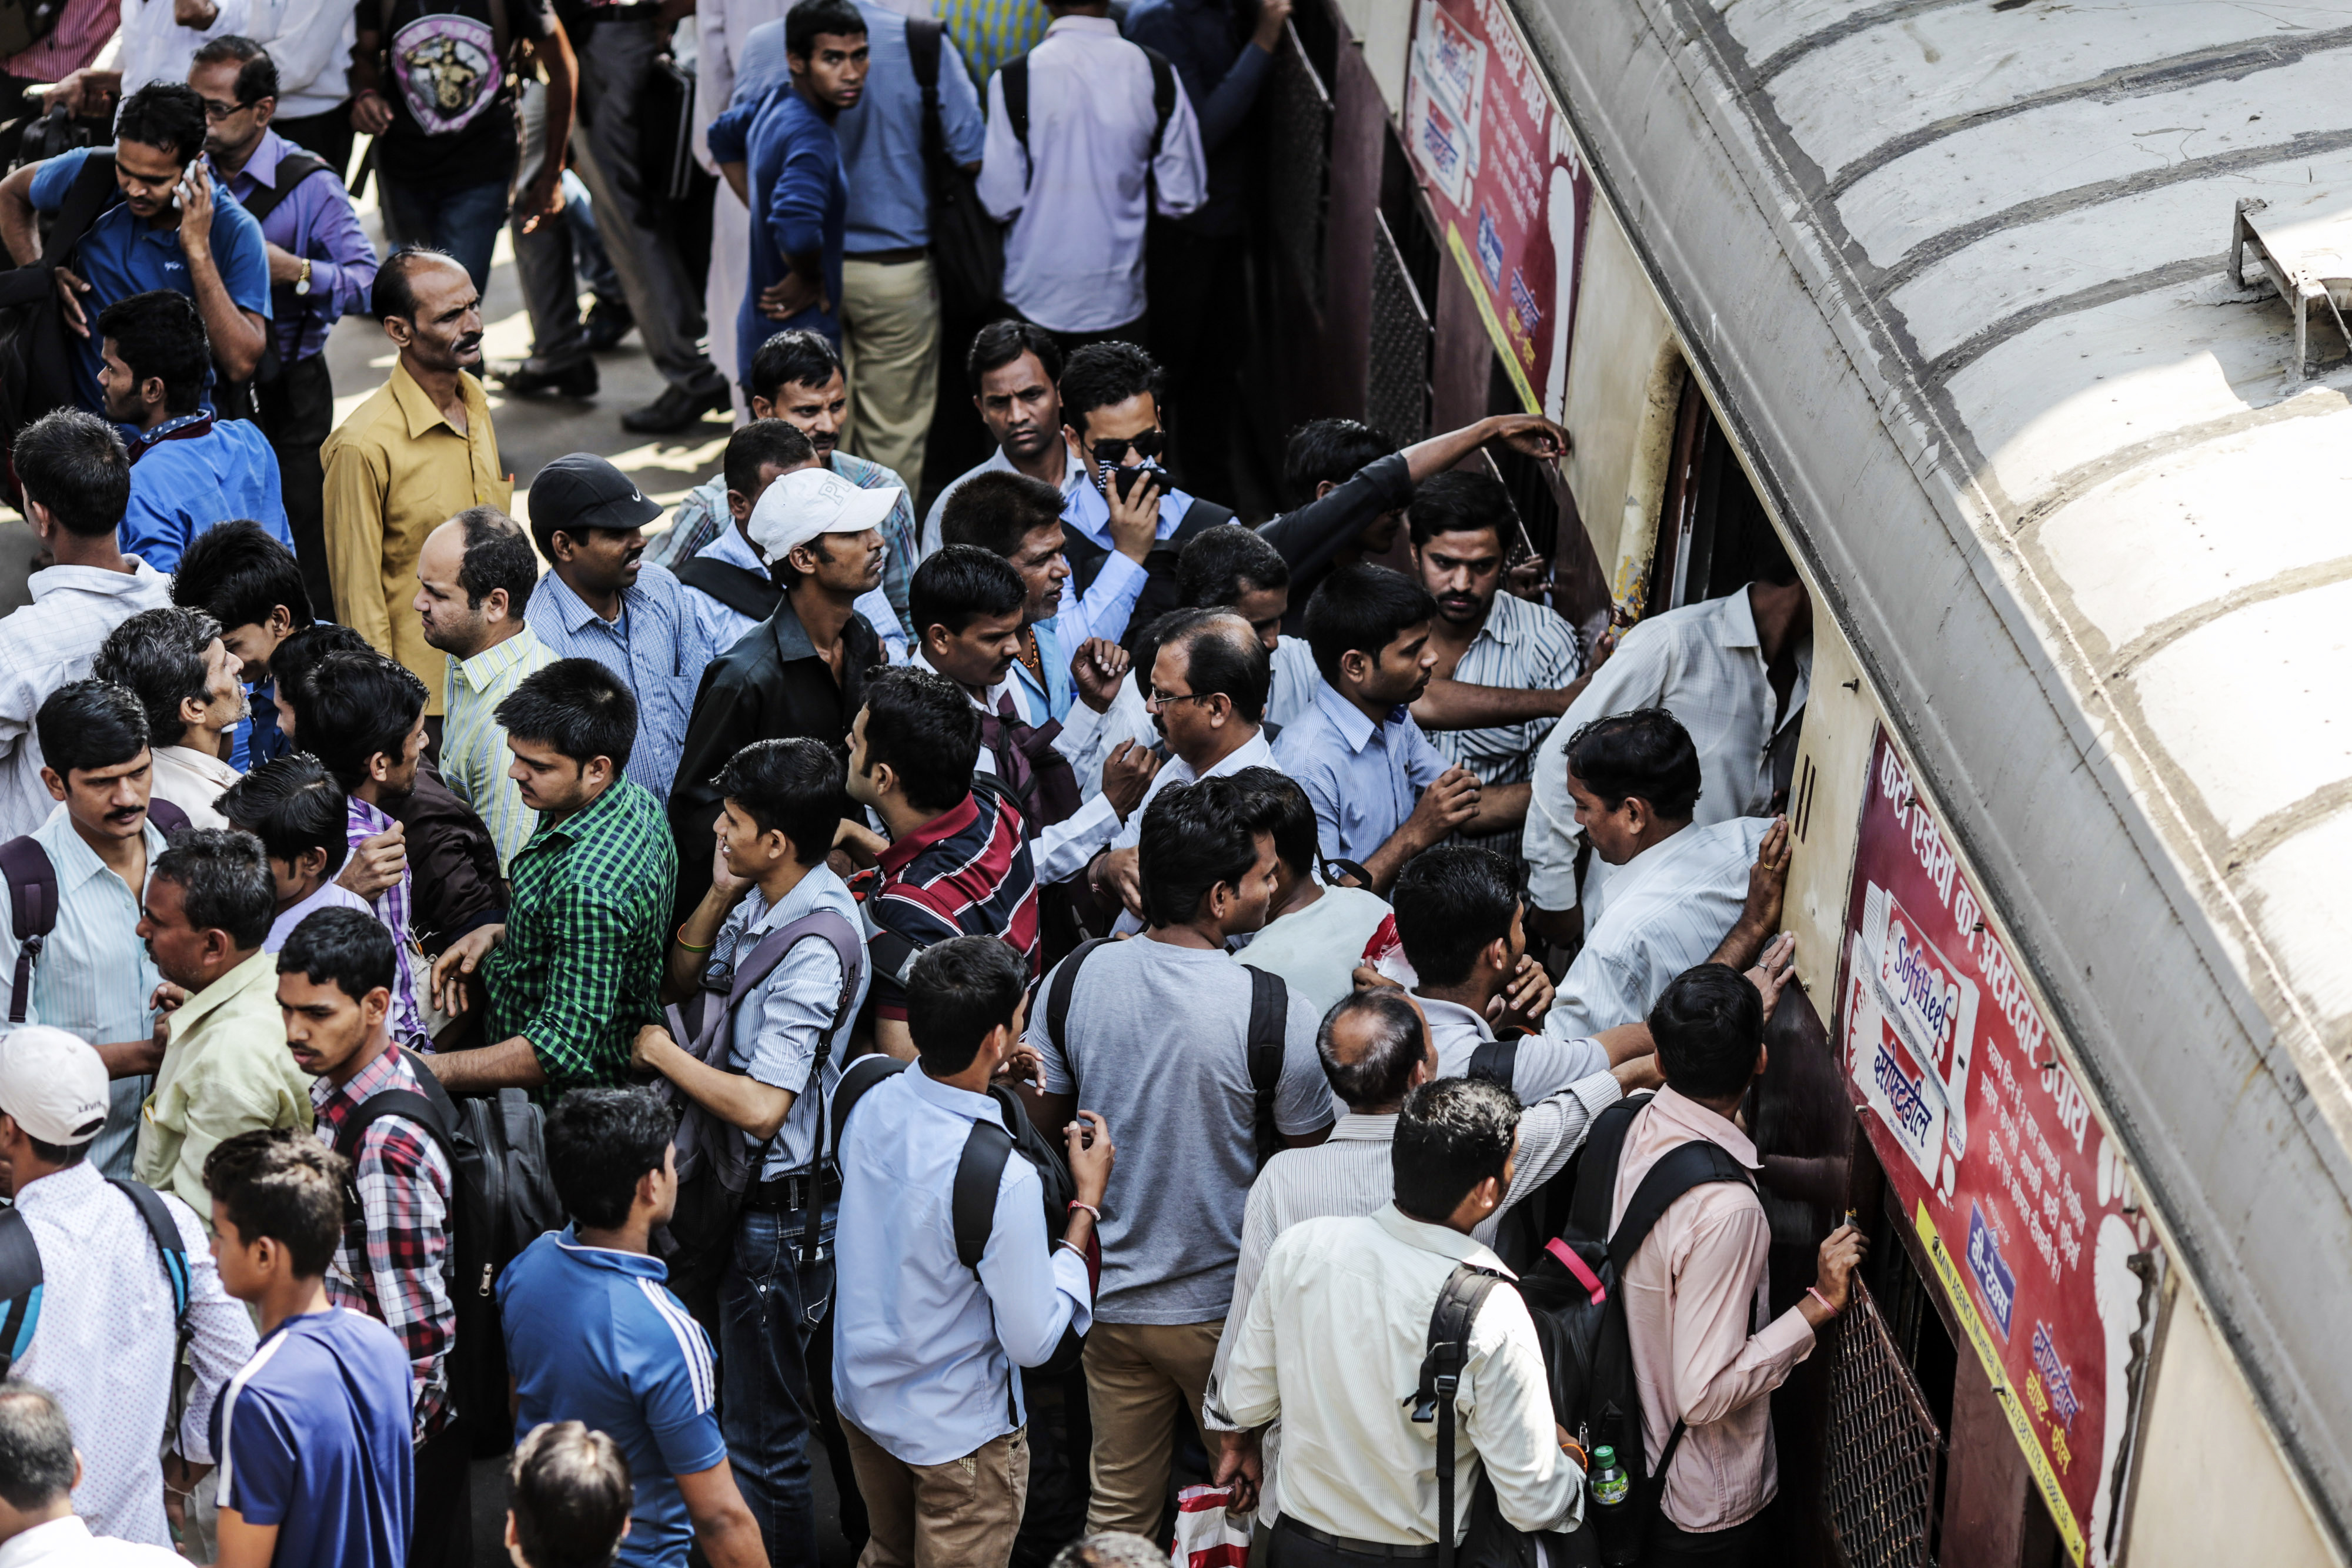 Passengers disembark as commuters wait to board a train during the morning rush hour at Kurla railway station in Mumbai, India, on Wednesday, April 15, 2015. (Dhiraj Singh—Bloomberg/Getty Images)